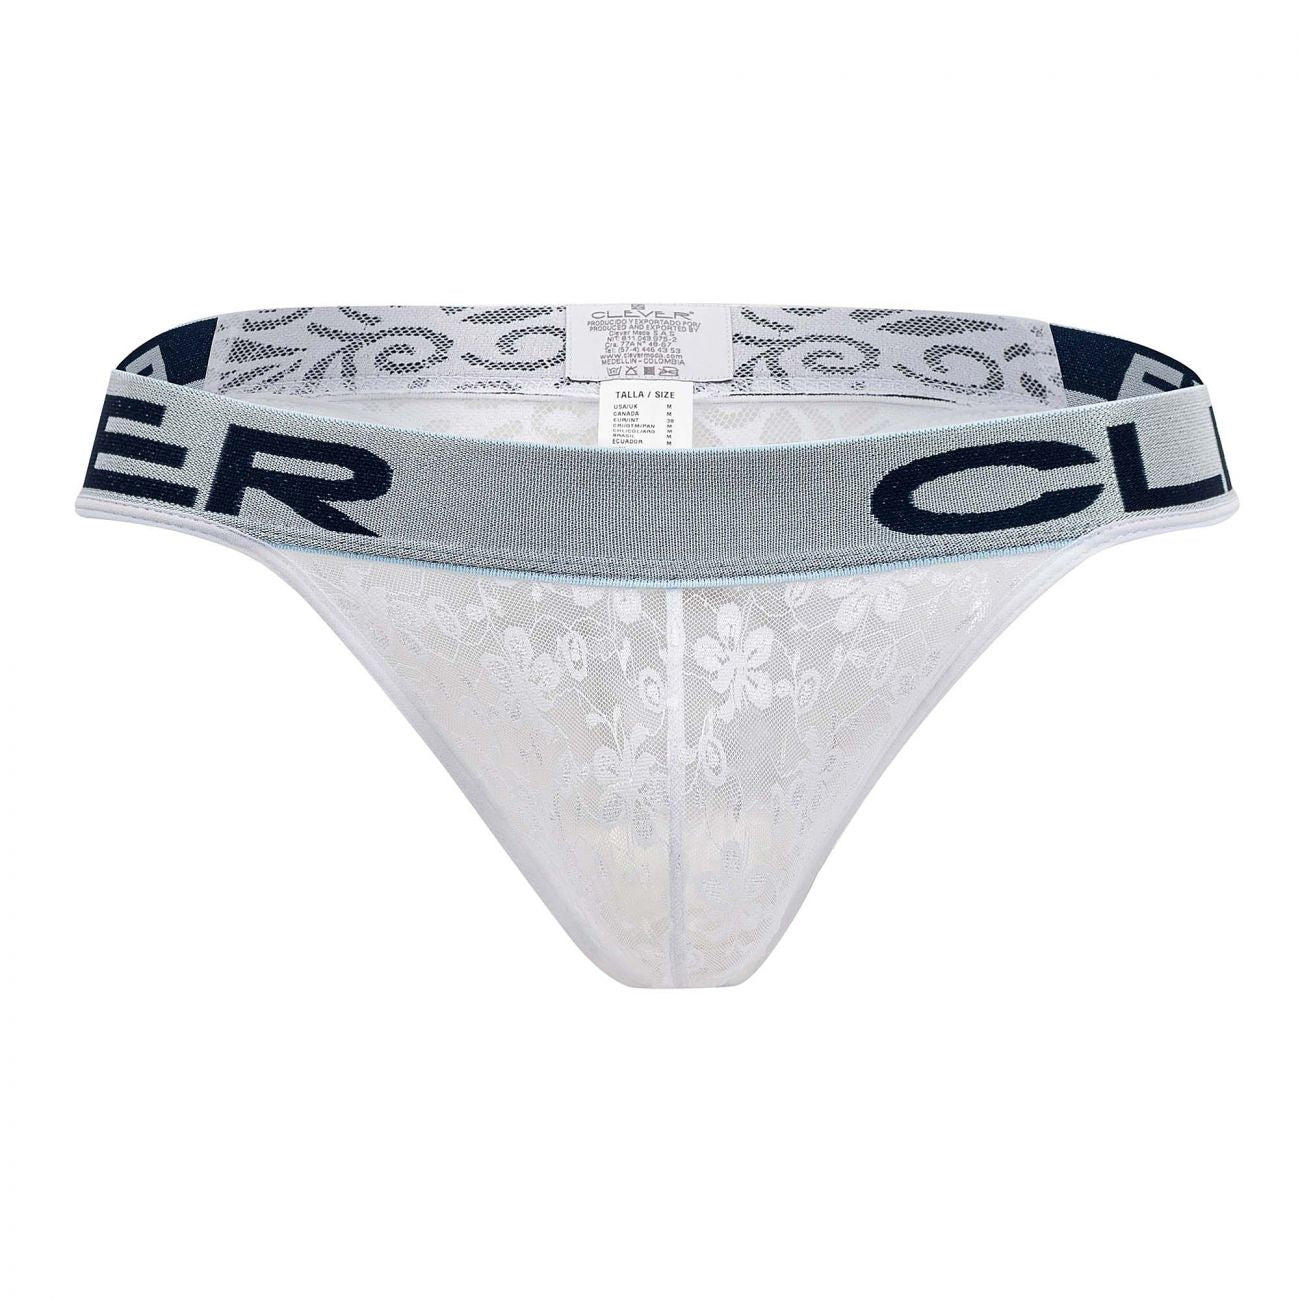 Clever 0581-1 Fantasy Thongs White